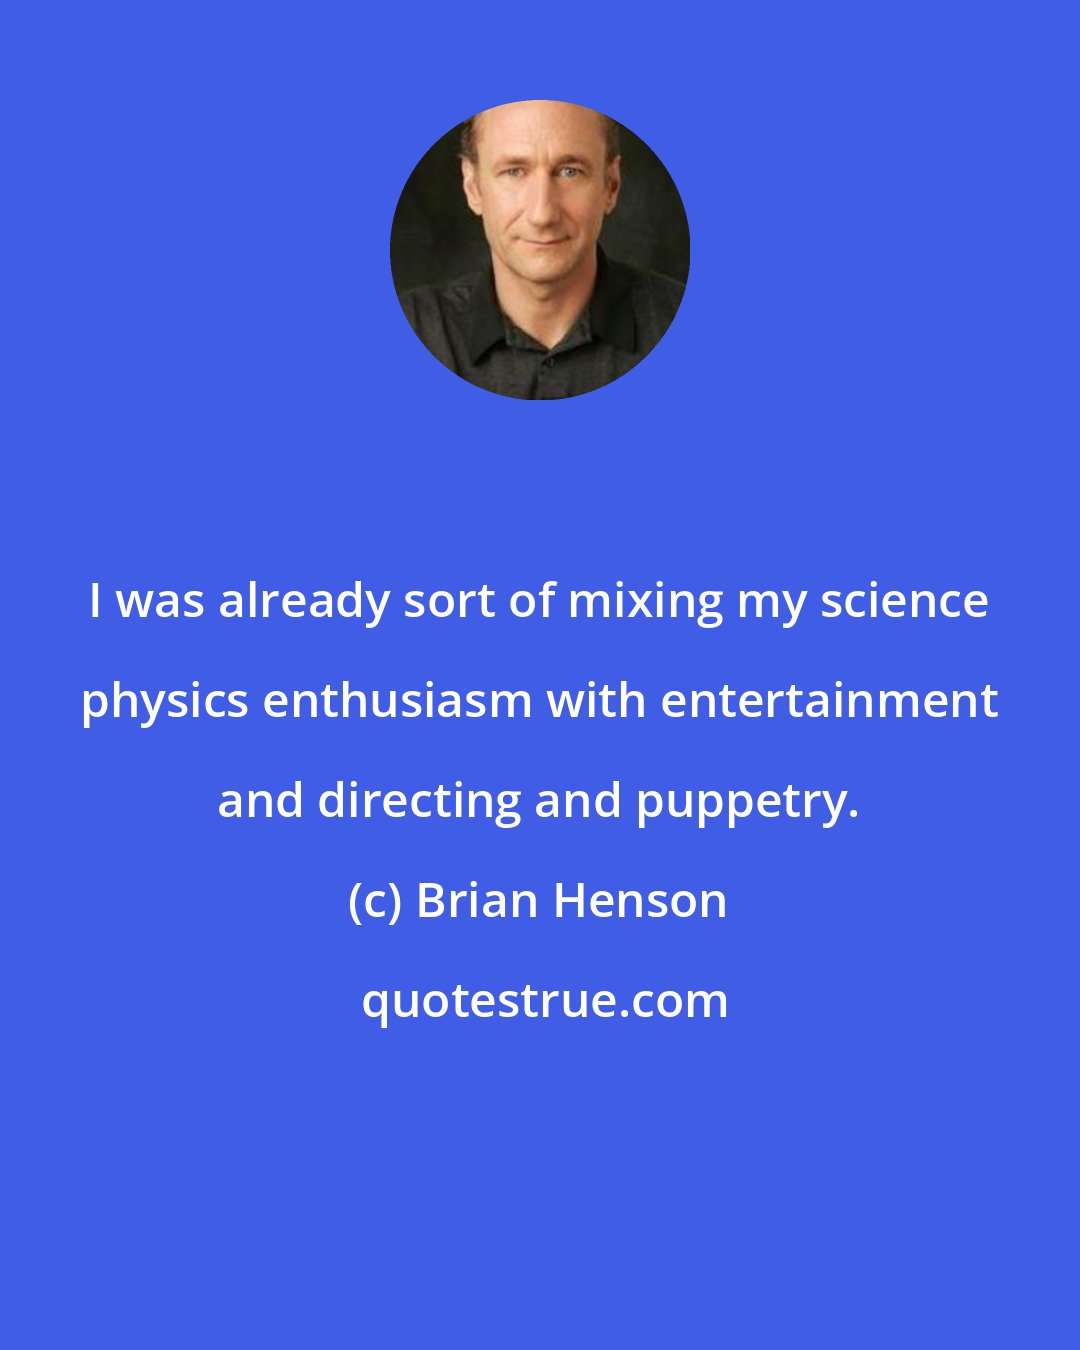 Brian Henson: I was already sort of mixing my science physics enthusiasm with entertainment and directing and puppetry.